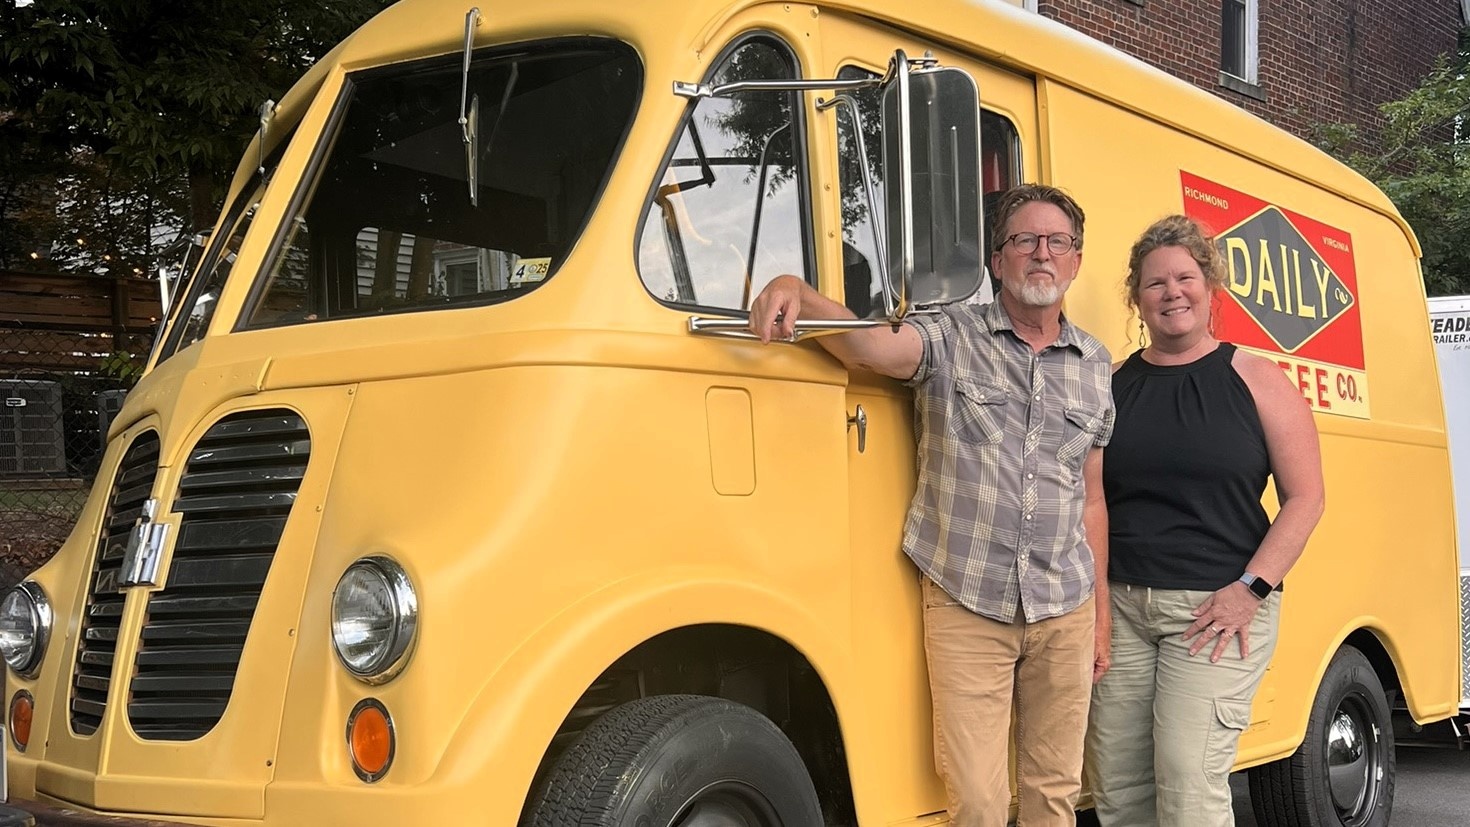 Slowed down by theft but undeterred, new local coffee truck gets rolling – RichmondBizSense